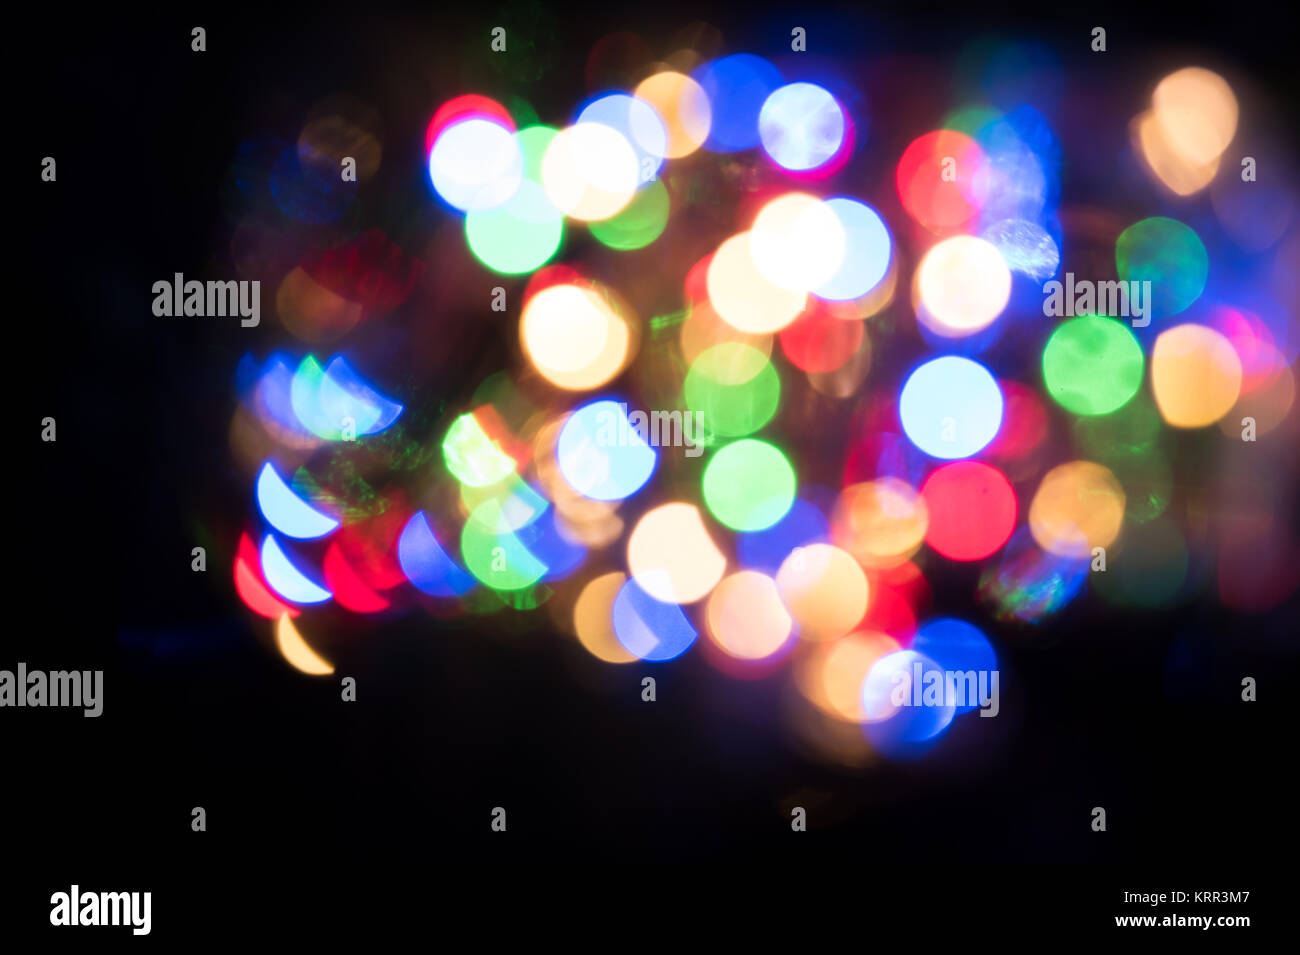 Abstract Multi Colored Lights Through Prism Stock Photo